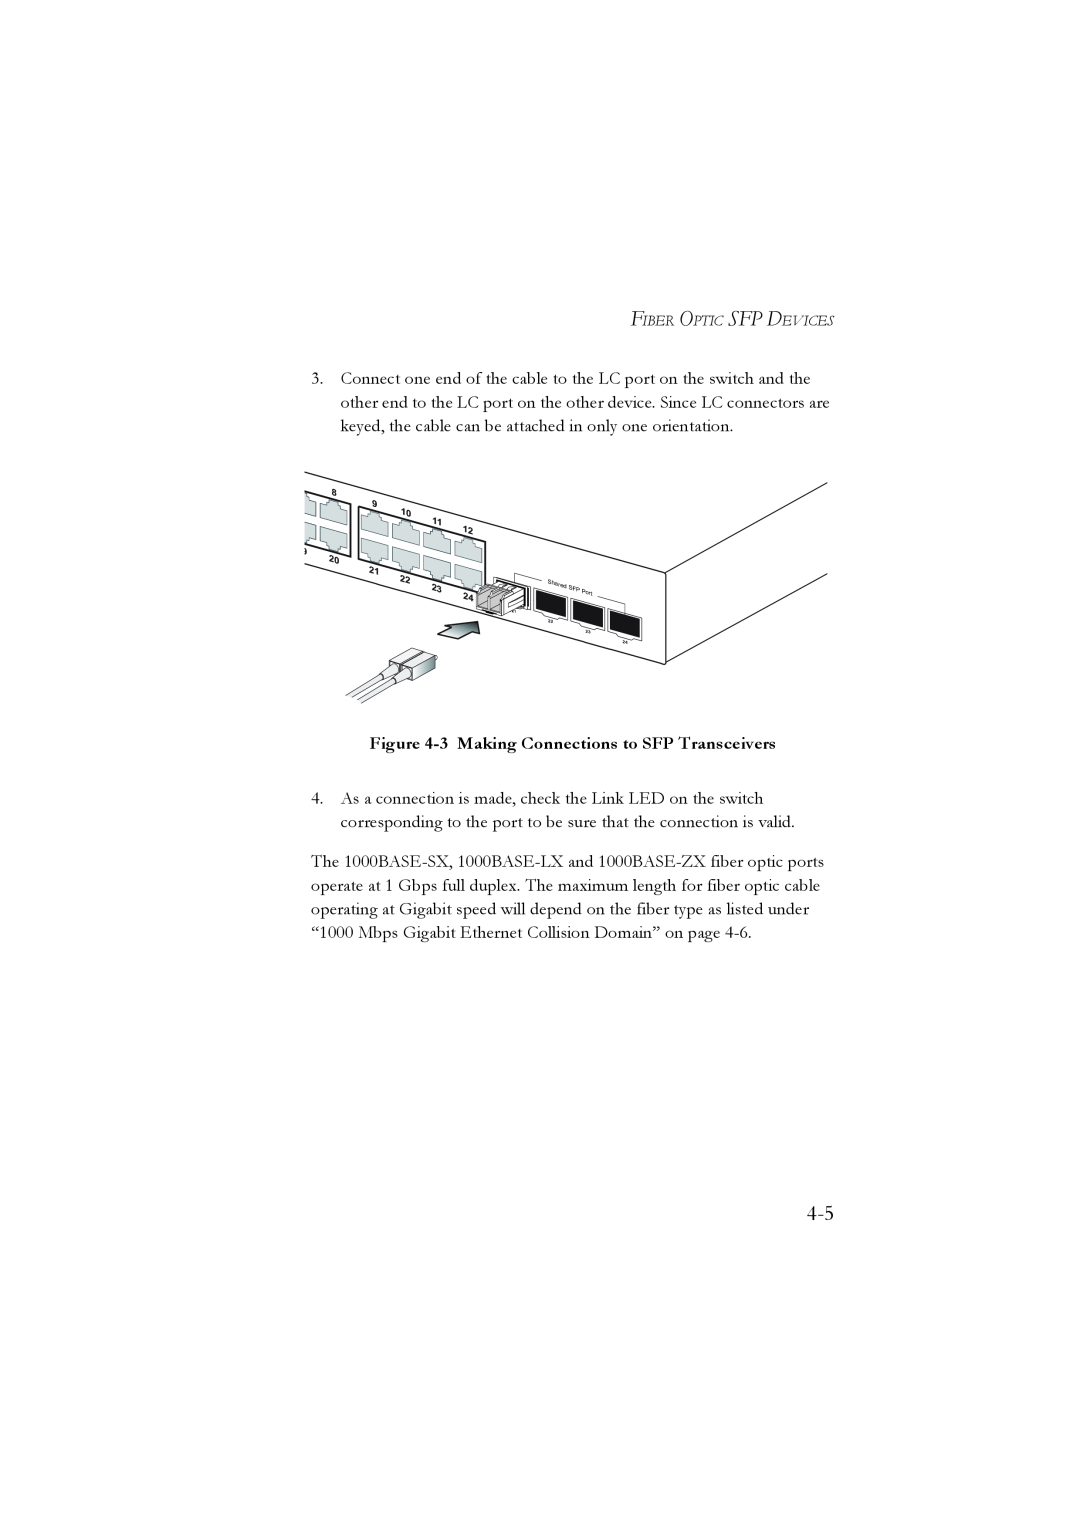 LevelOne GSW-2476 user manual 3 Making Connections to SFP Transceivers, Fiber Optic Sfp Devices 